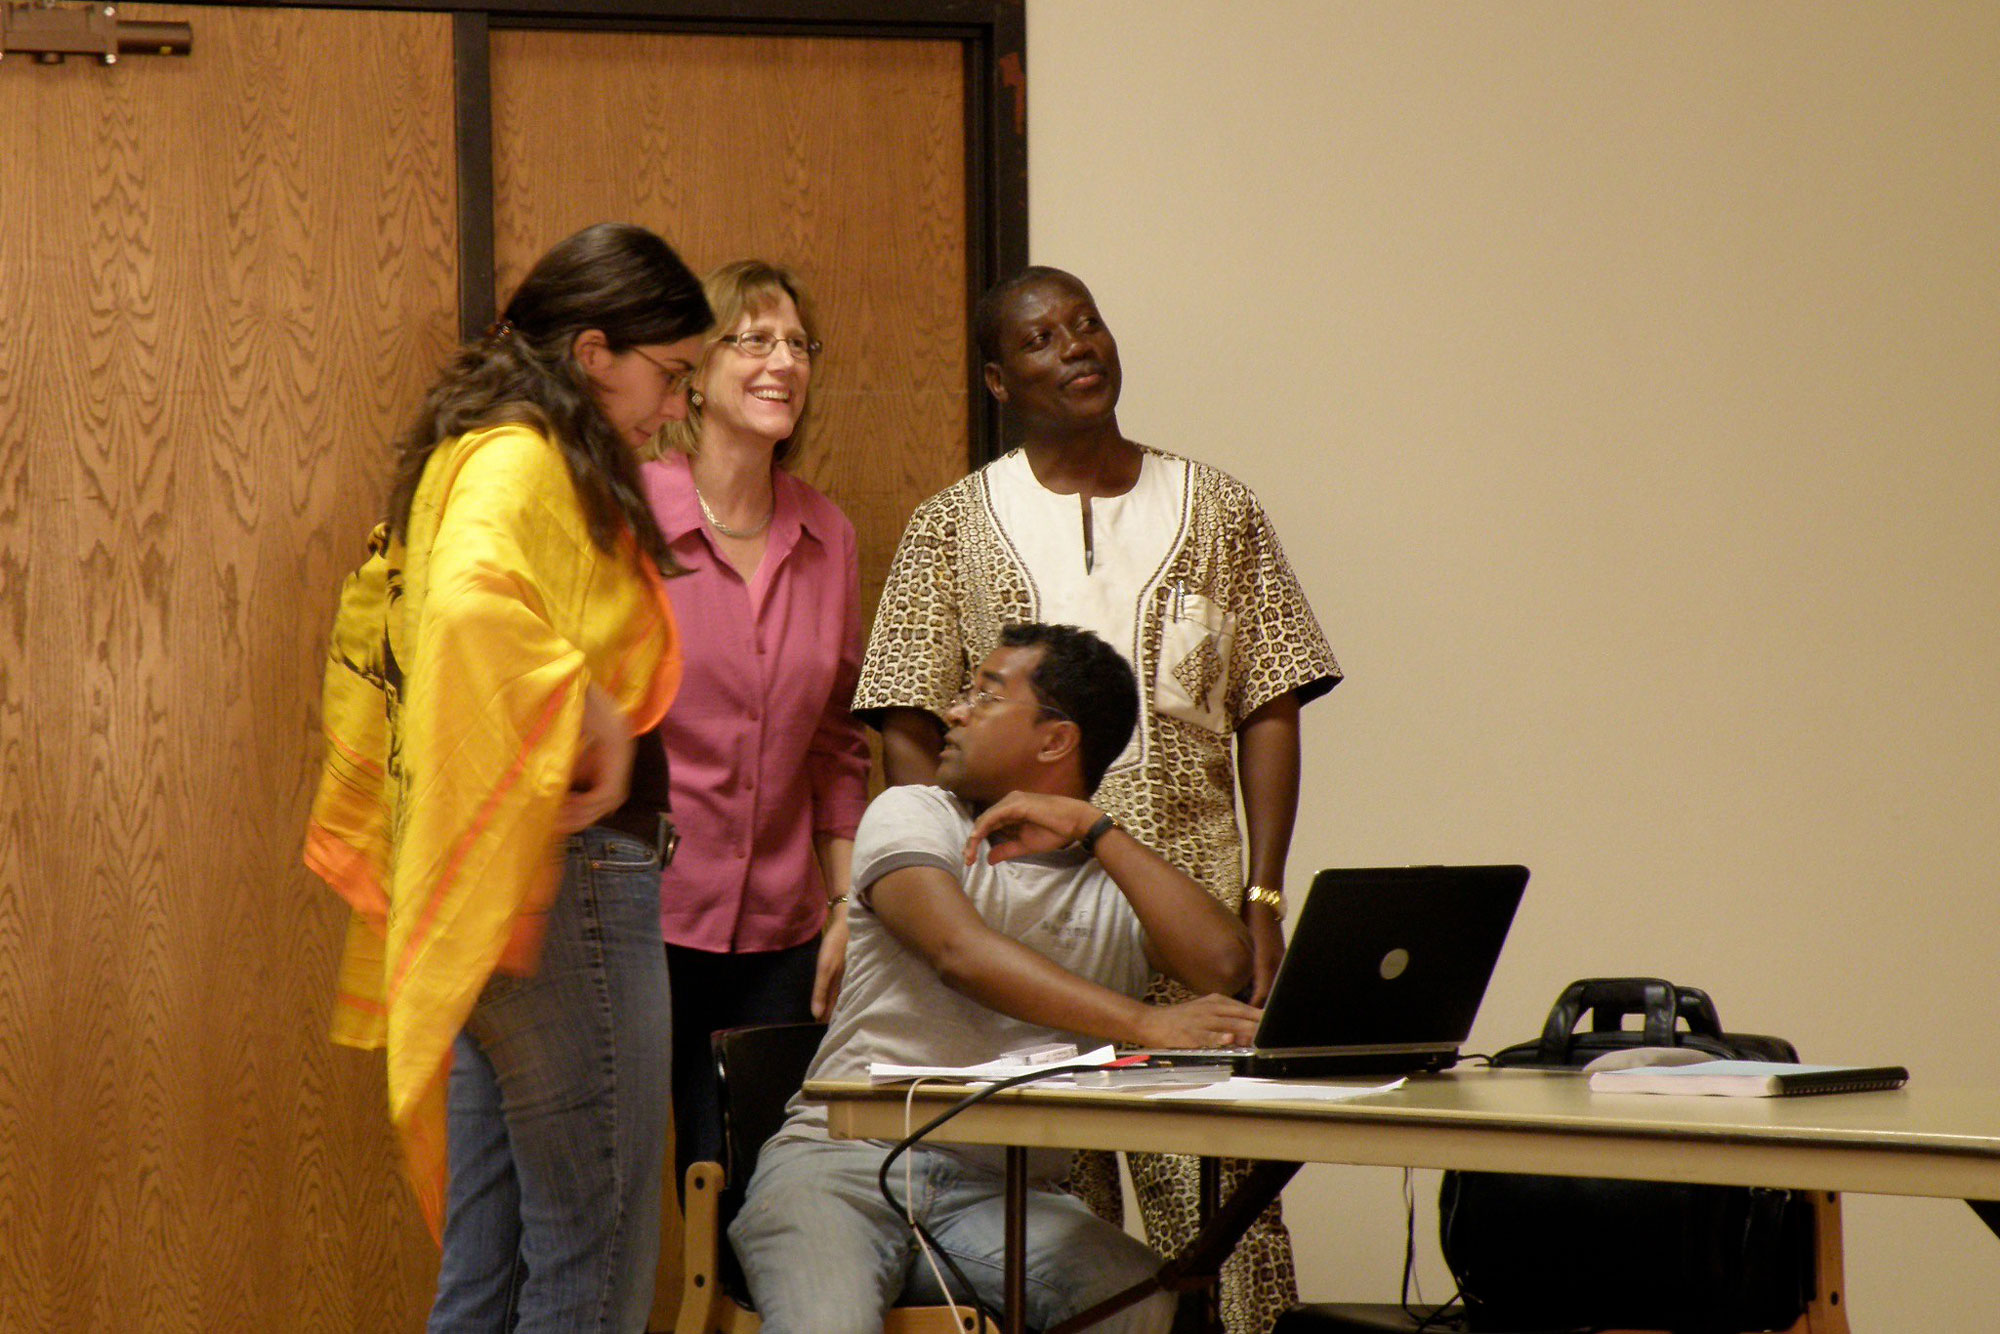 Two women and one man stand above a man seated at a desk with an open laptop. They look excited and in conversation as they ready to begin a presentation.